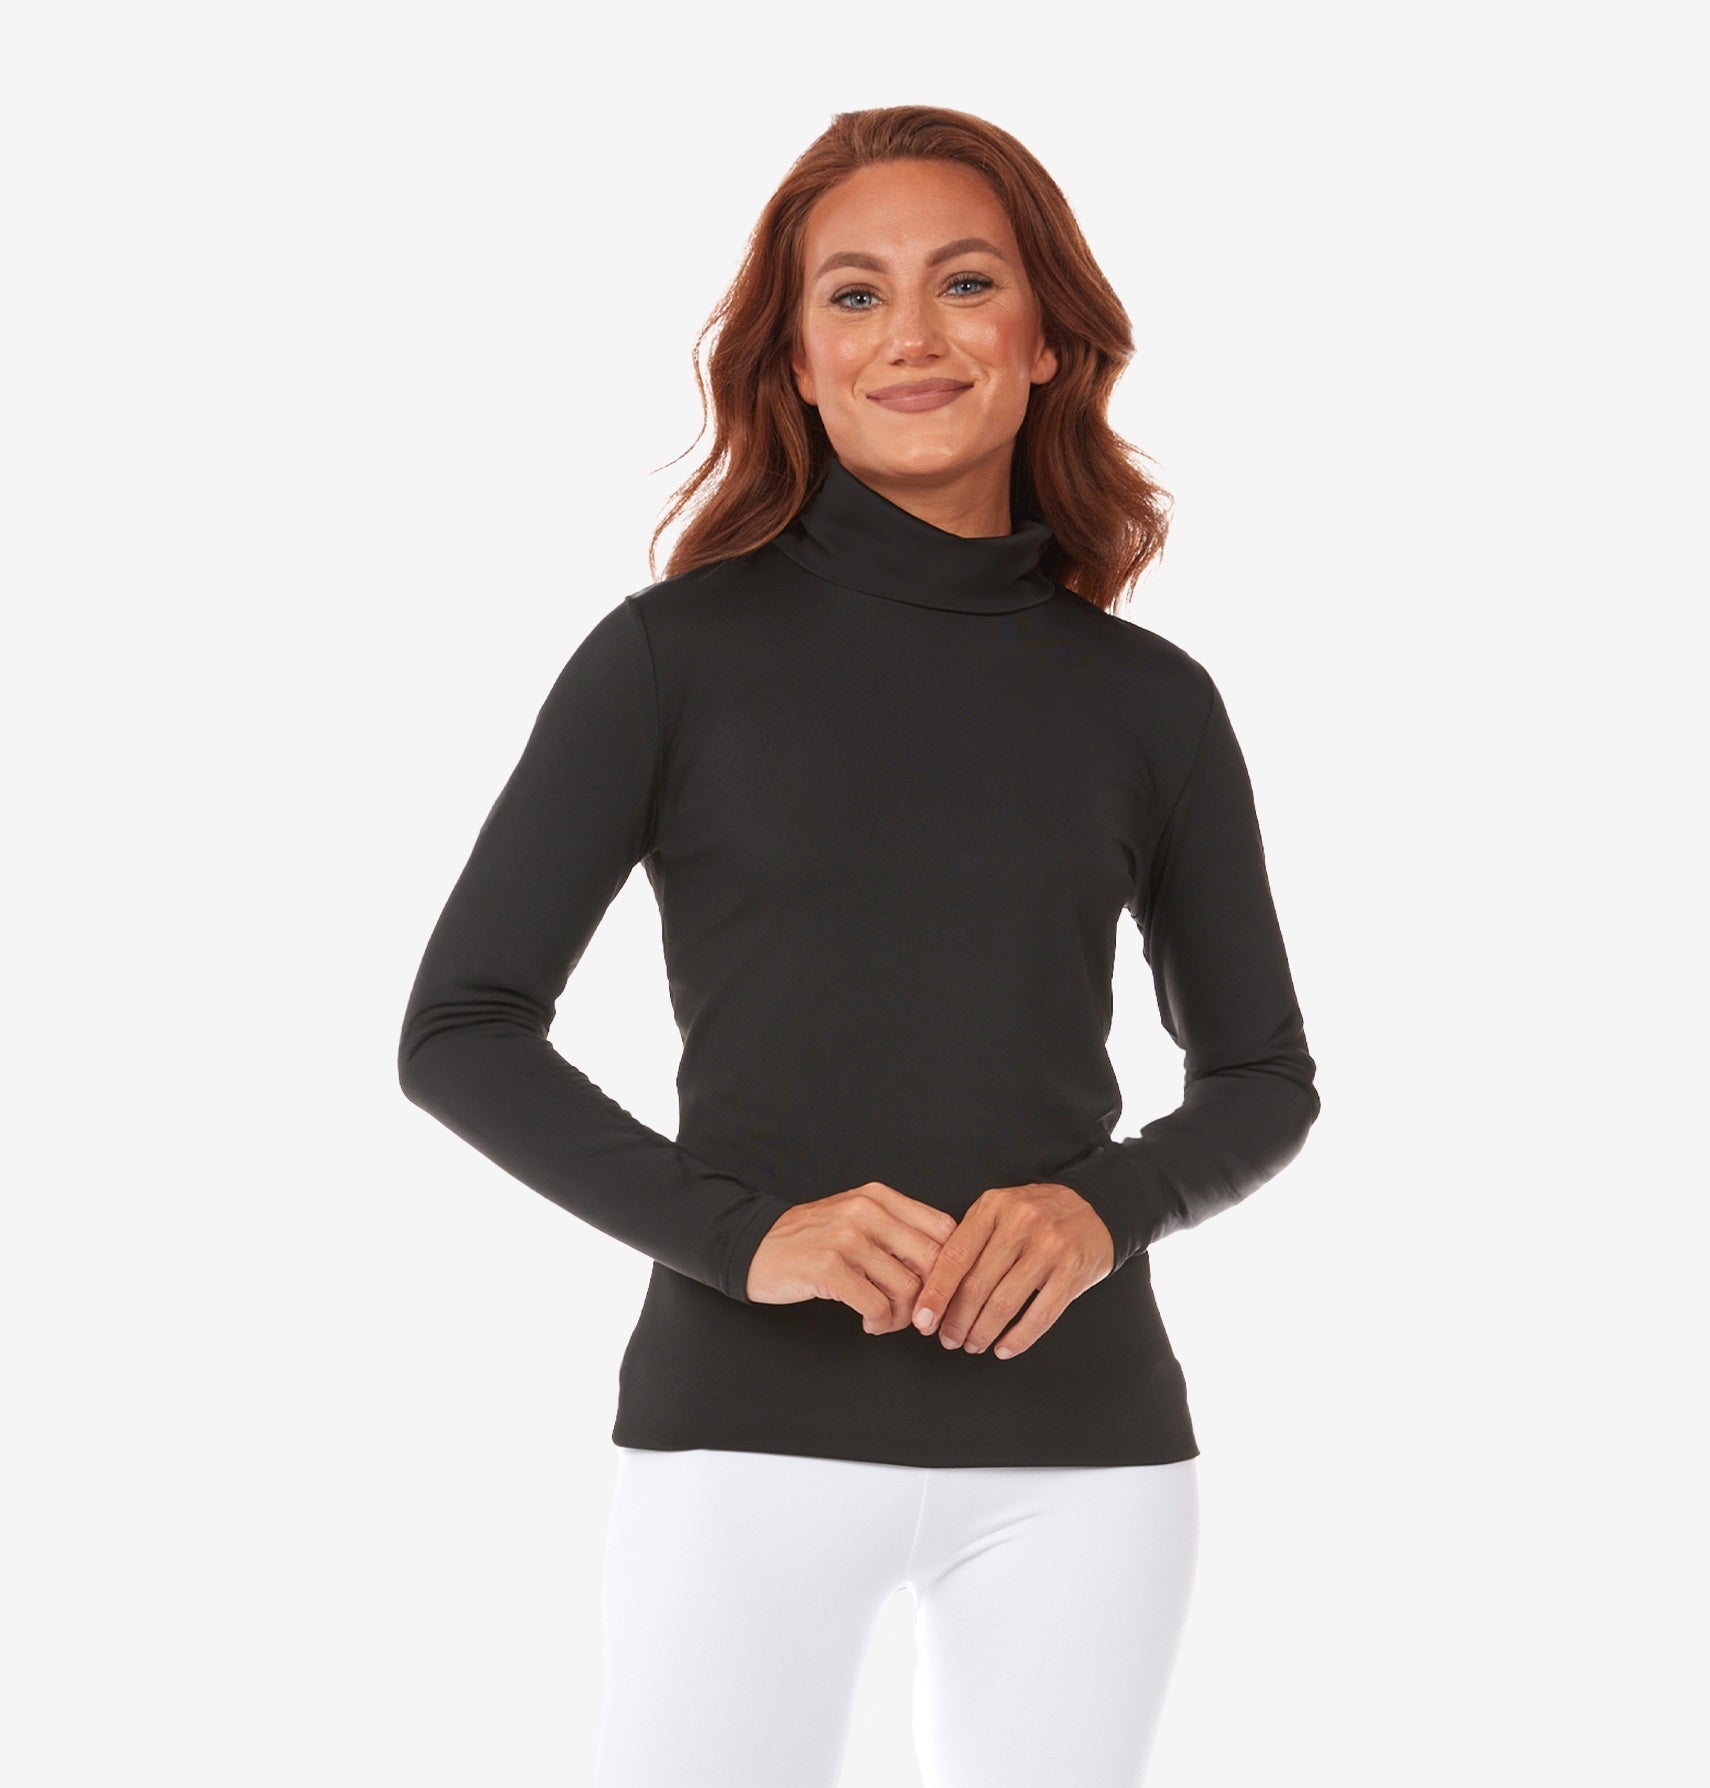 Women\'s Thermal + Tops: Returns Shipping Free (US) Thermajane Exchanges– Free 